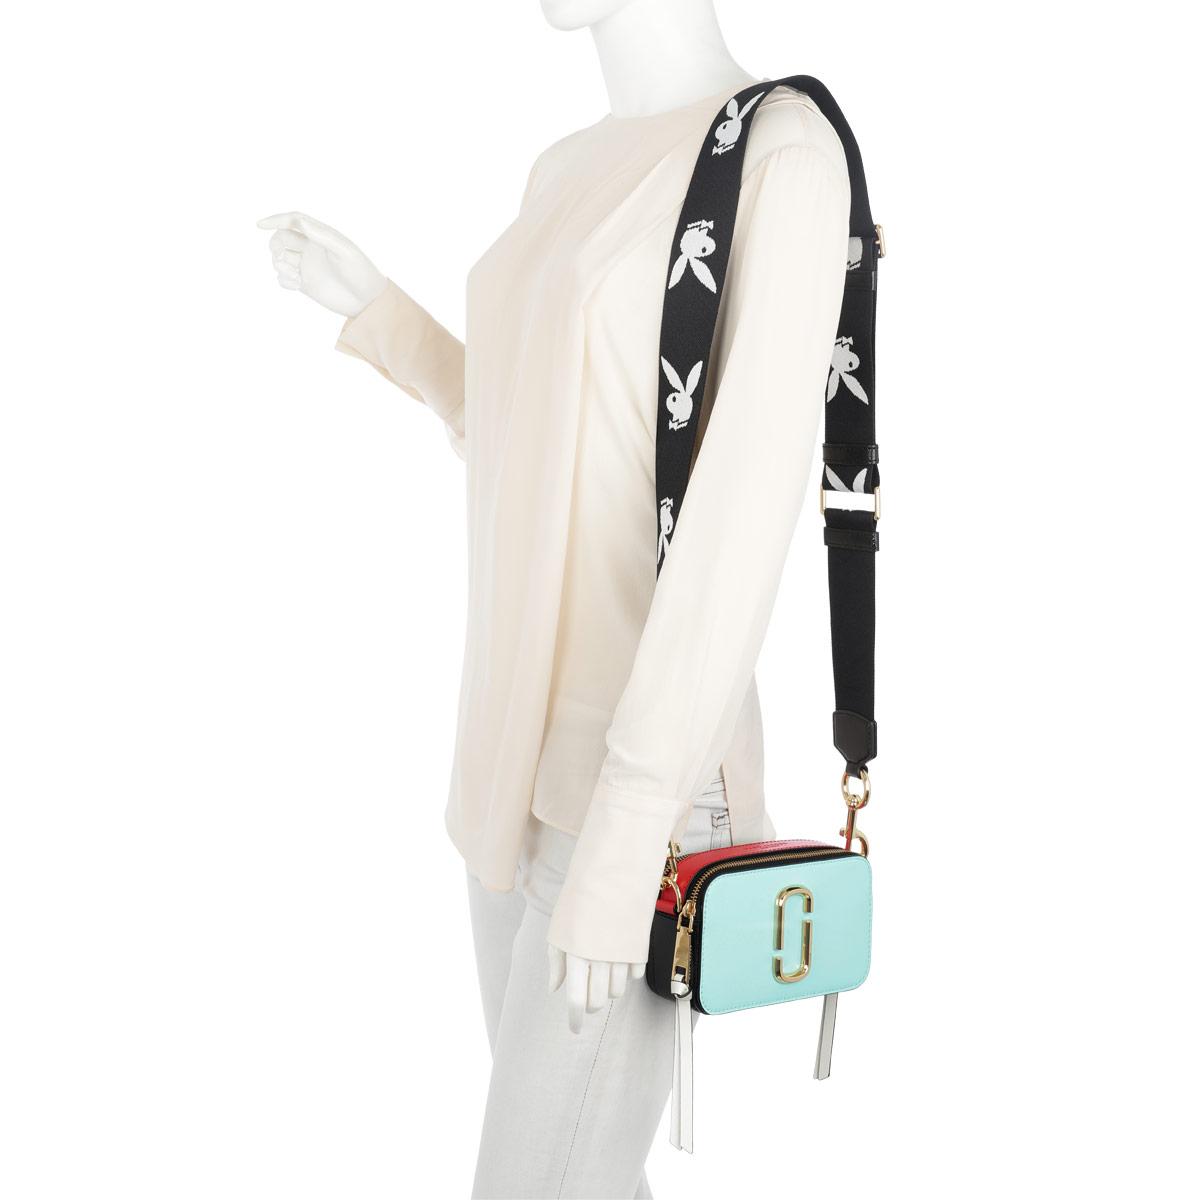 Marc Jacobs White The Snapshot Small Saffiano Leather Camera Bag at FORZIERI